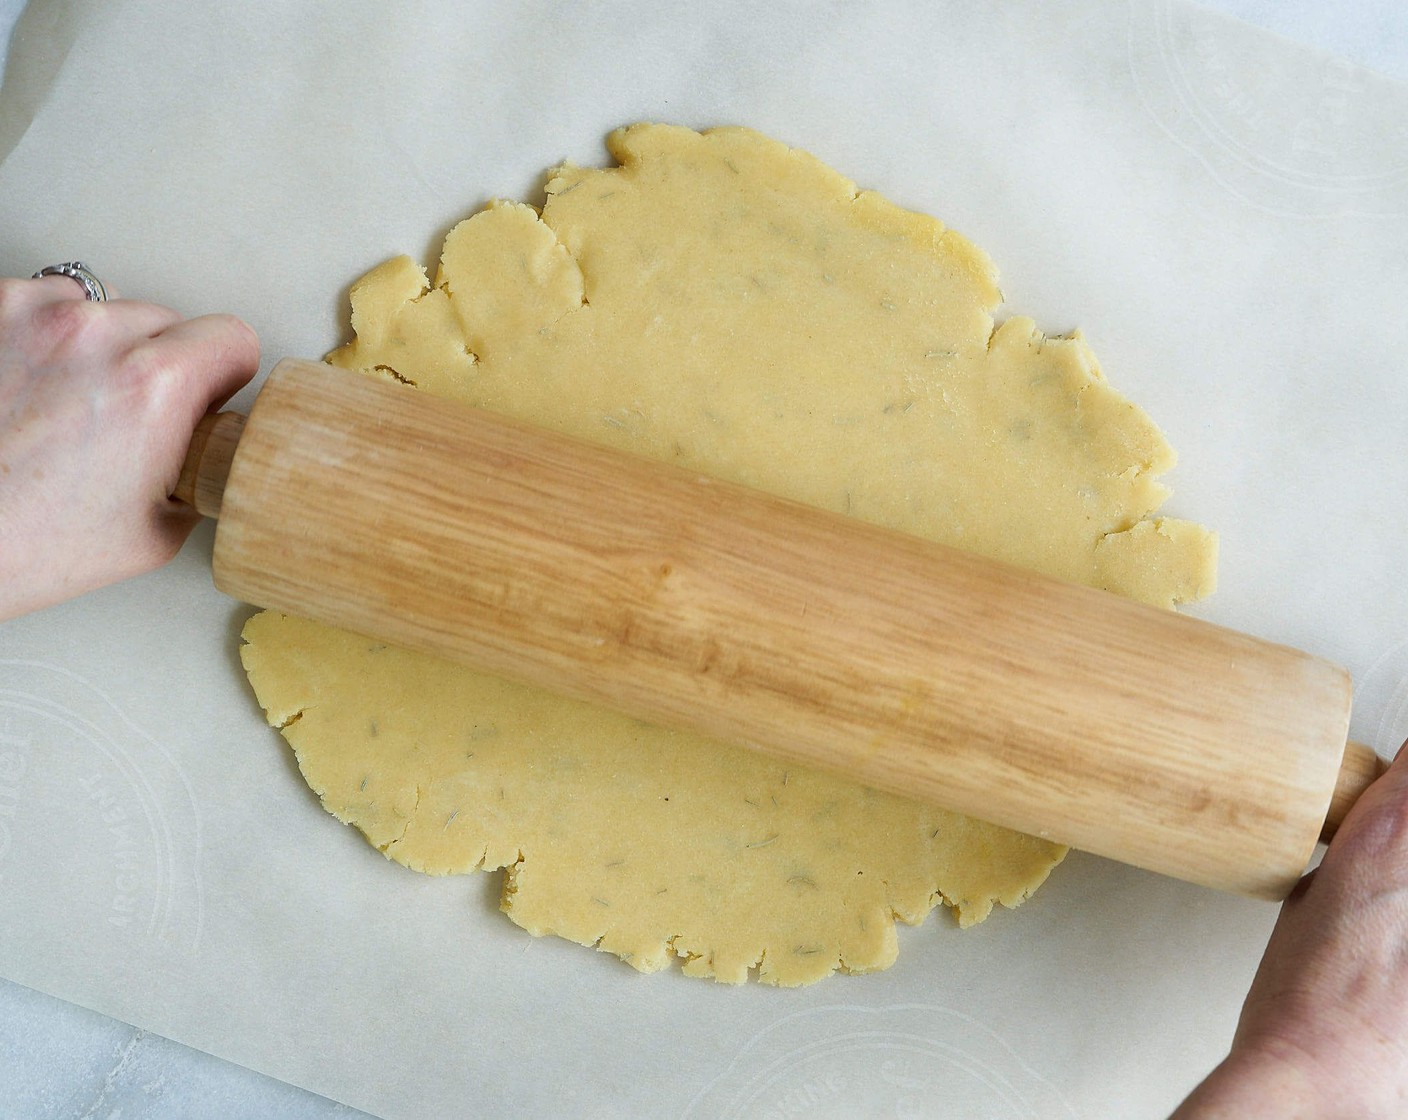 step 6 Remove the dough from the fridge and sprinkle flour on to rolling pin so it doesn't stick. Roll out dough on to parchment paper to about 10 inches in diameter. It doesn't have to be perfect, it's a rustic!